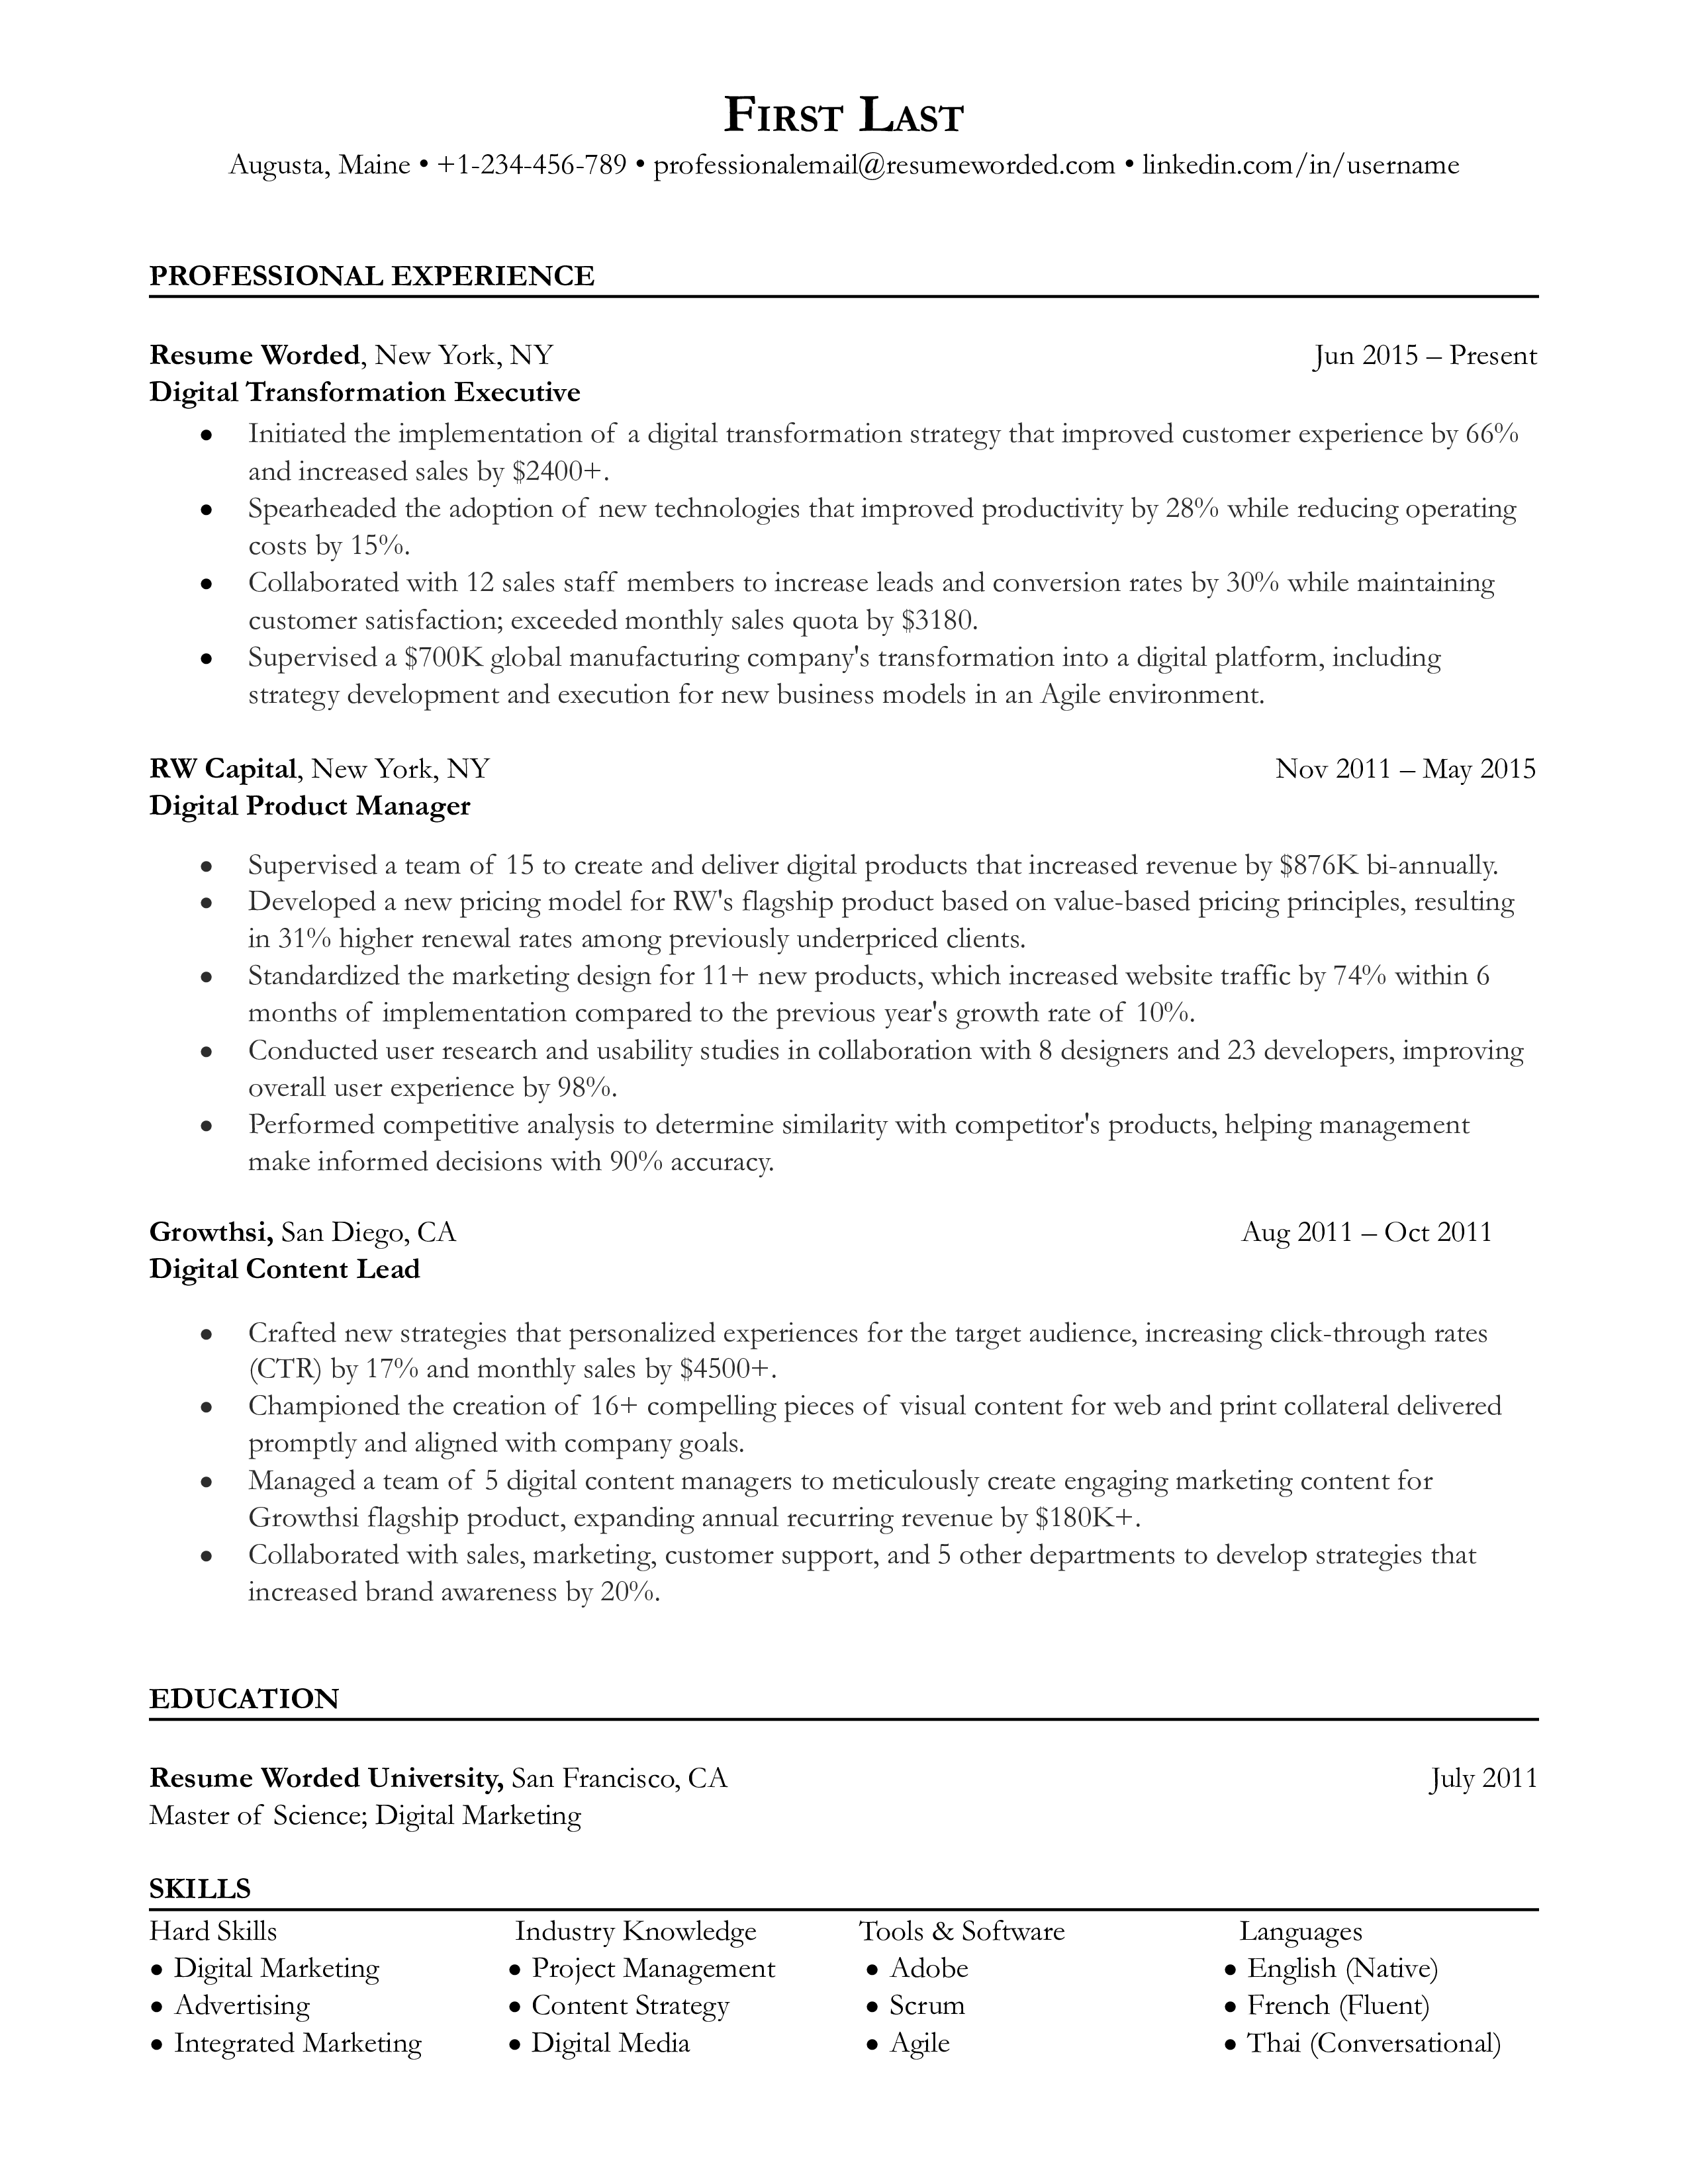 A well-structured CV for a Digital Transformation Executive role showcasing specific skills and projects.